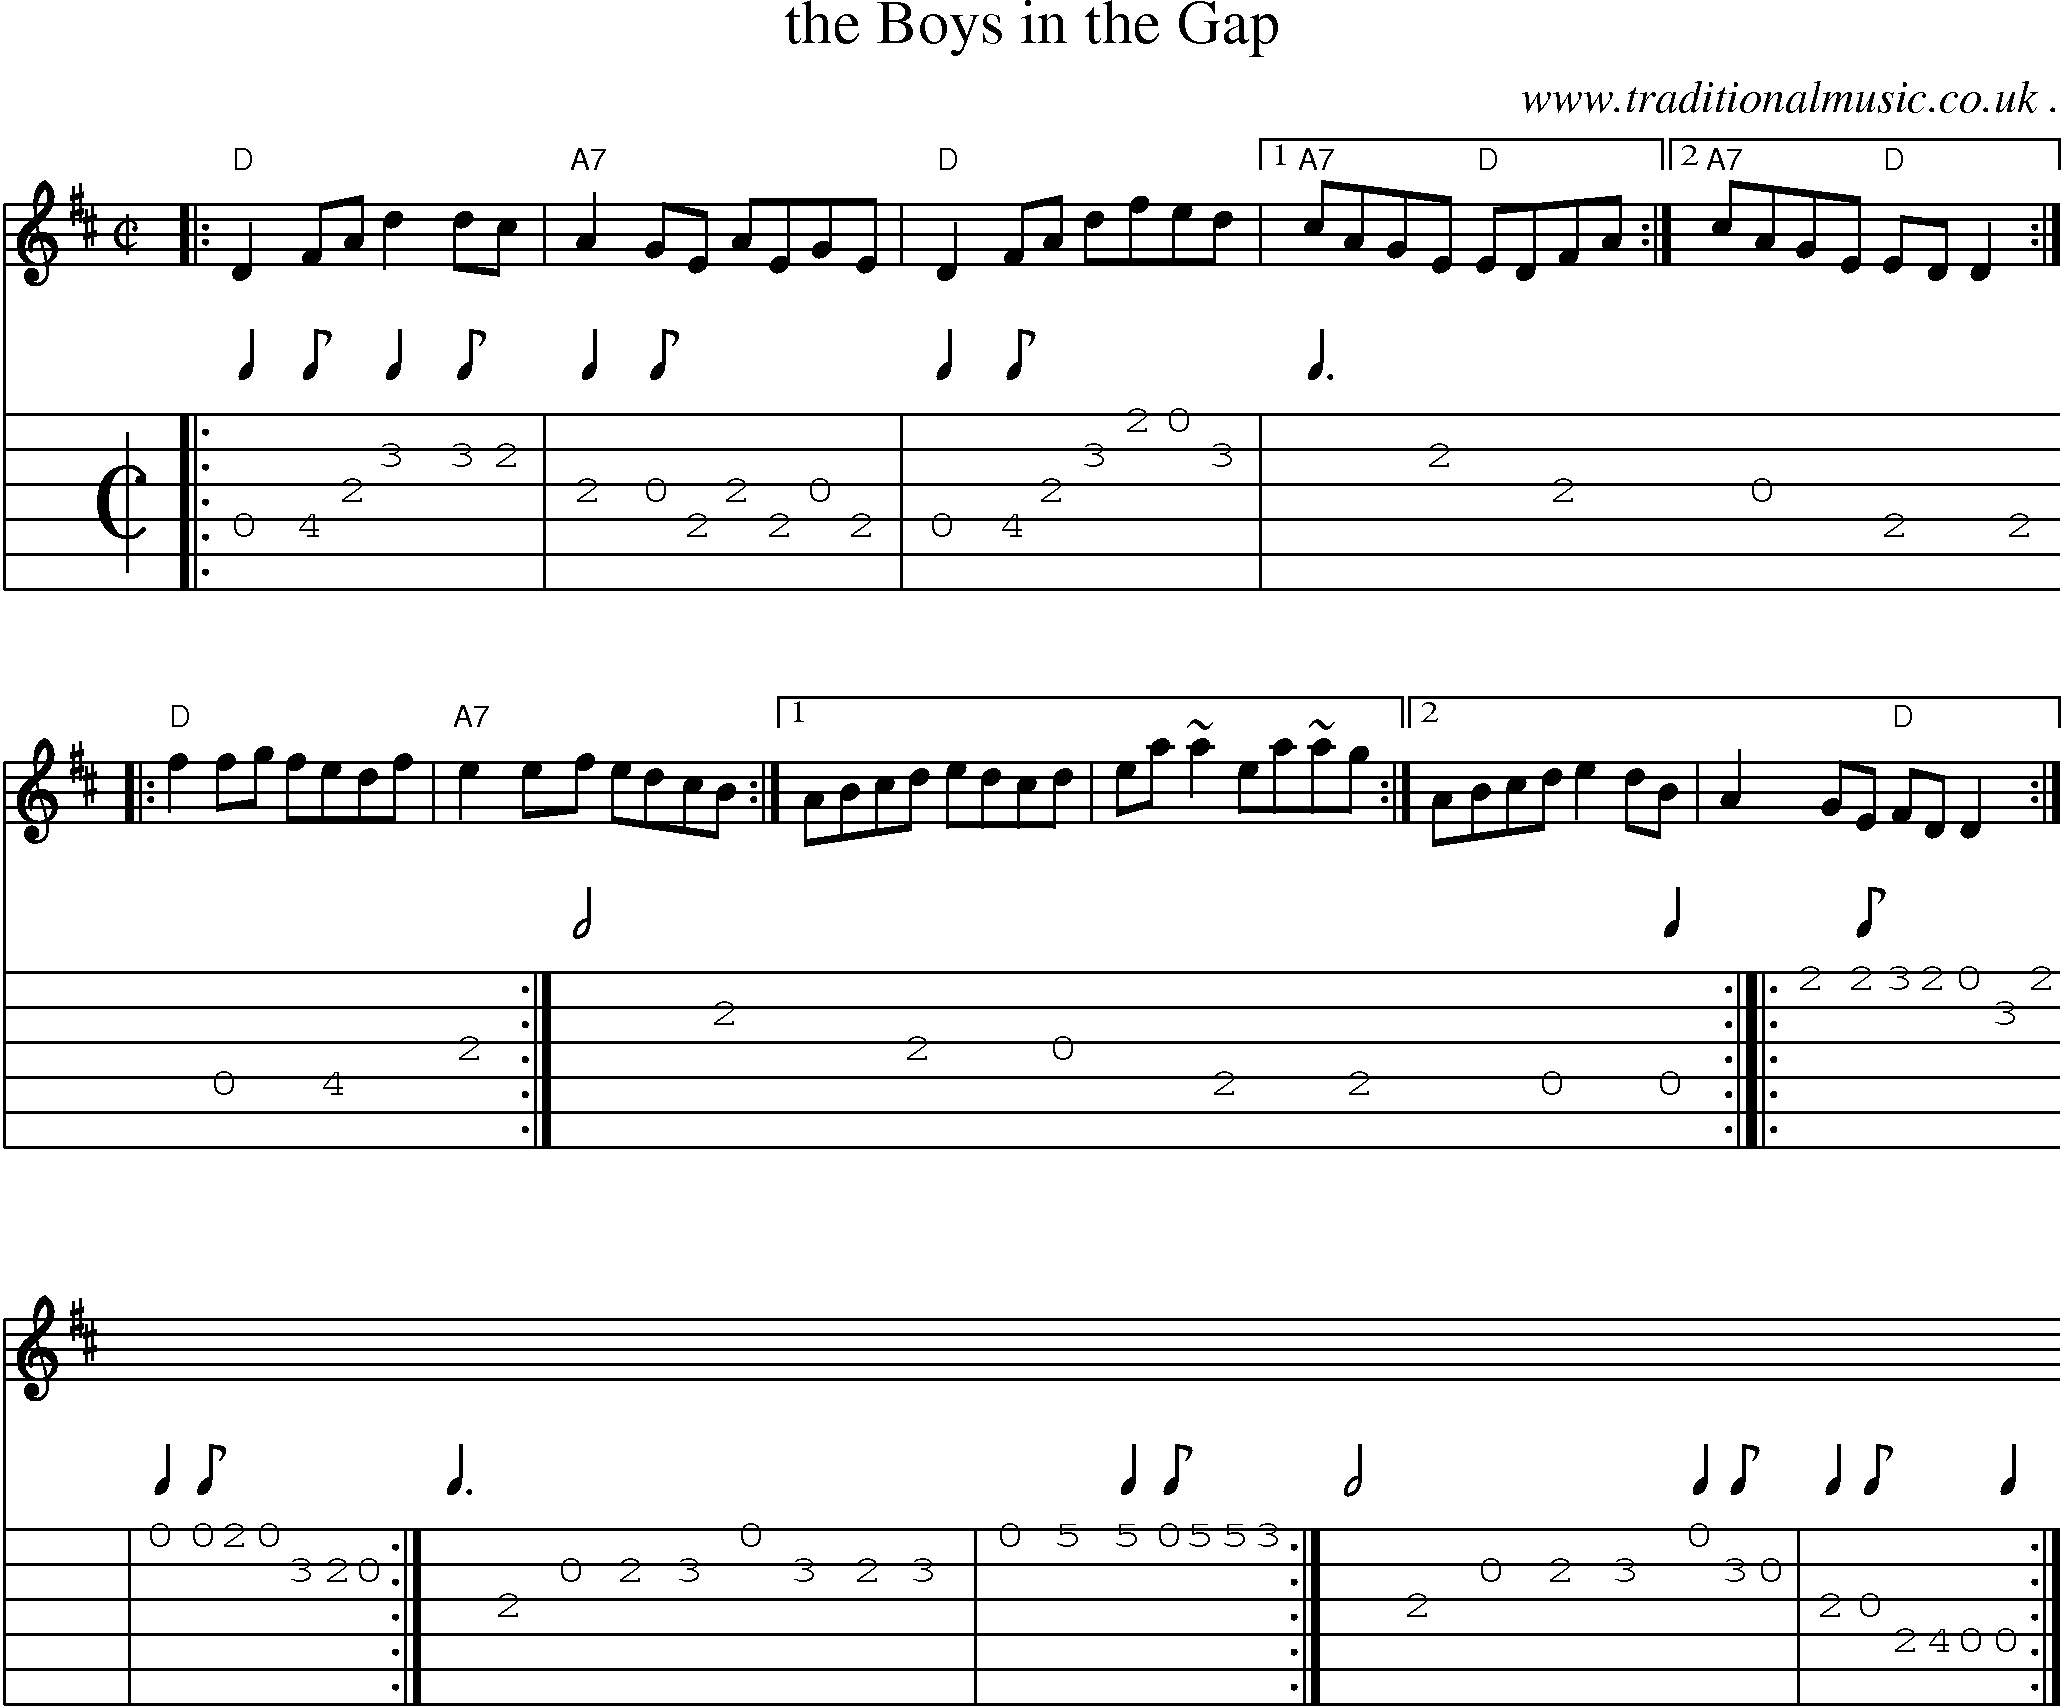 Sheet-music  score, Chords and Guitar Tabs for The Boys In The Gap